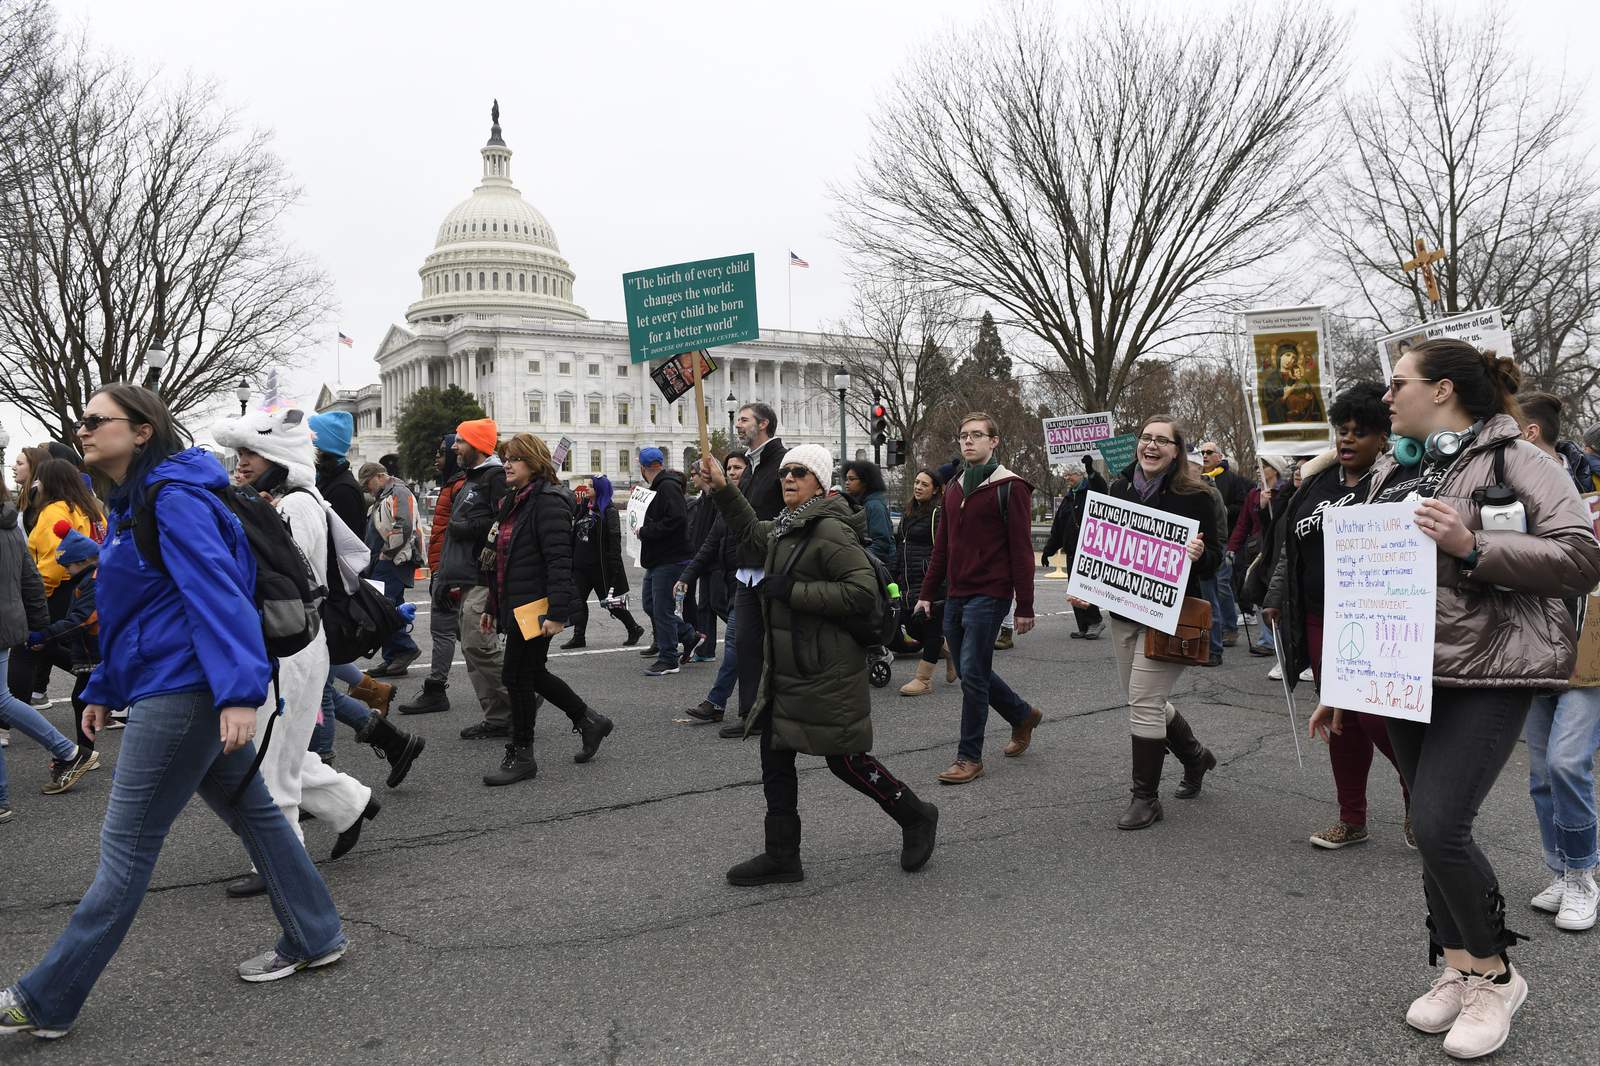 March for Life asks its supporters to stay home this year